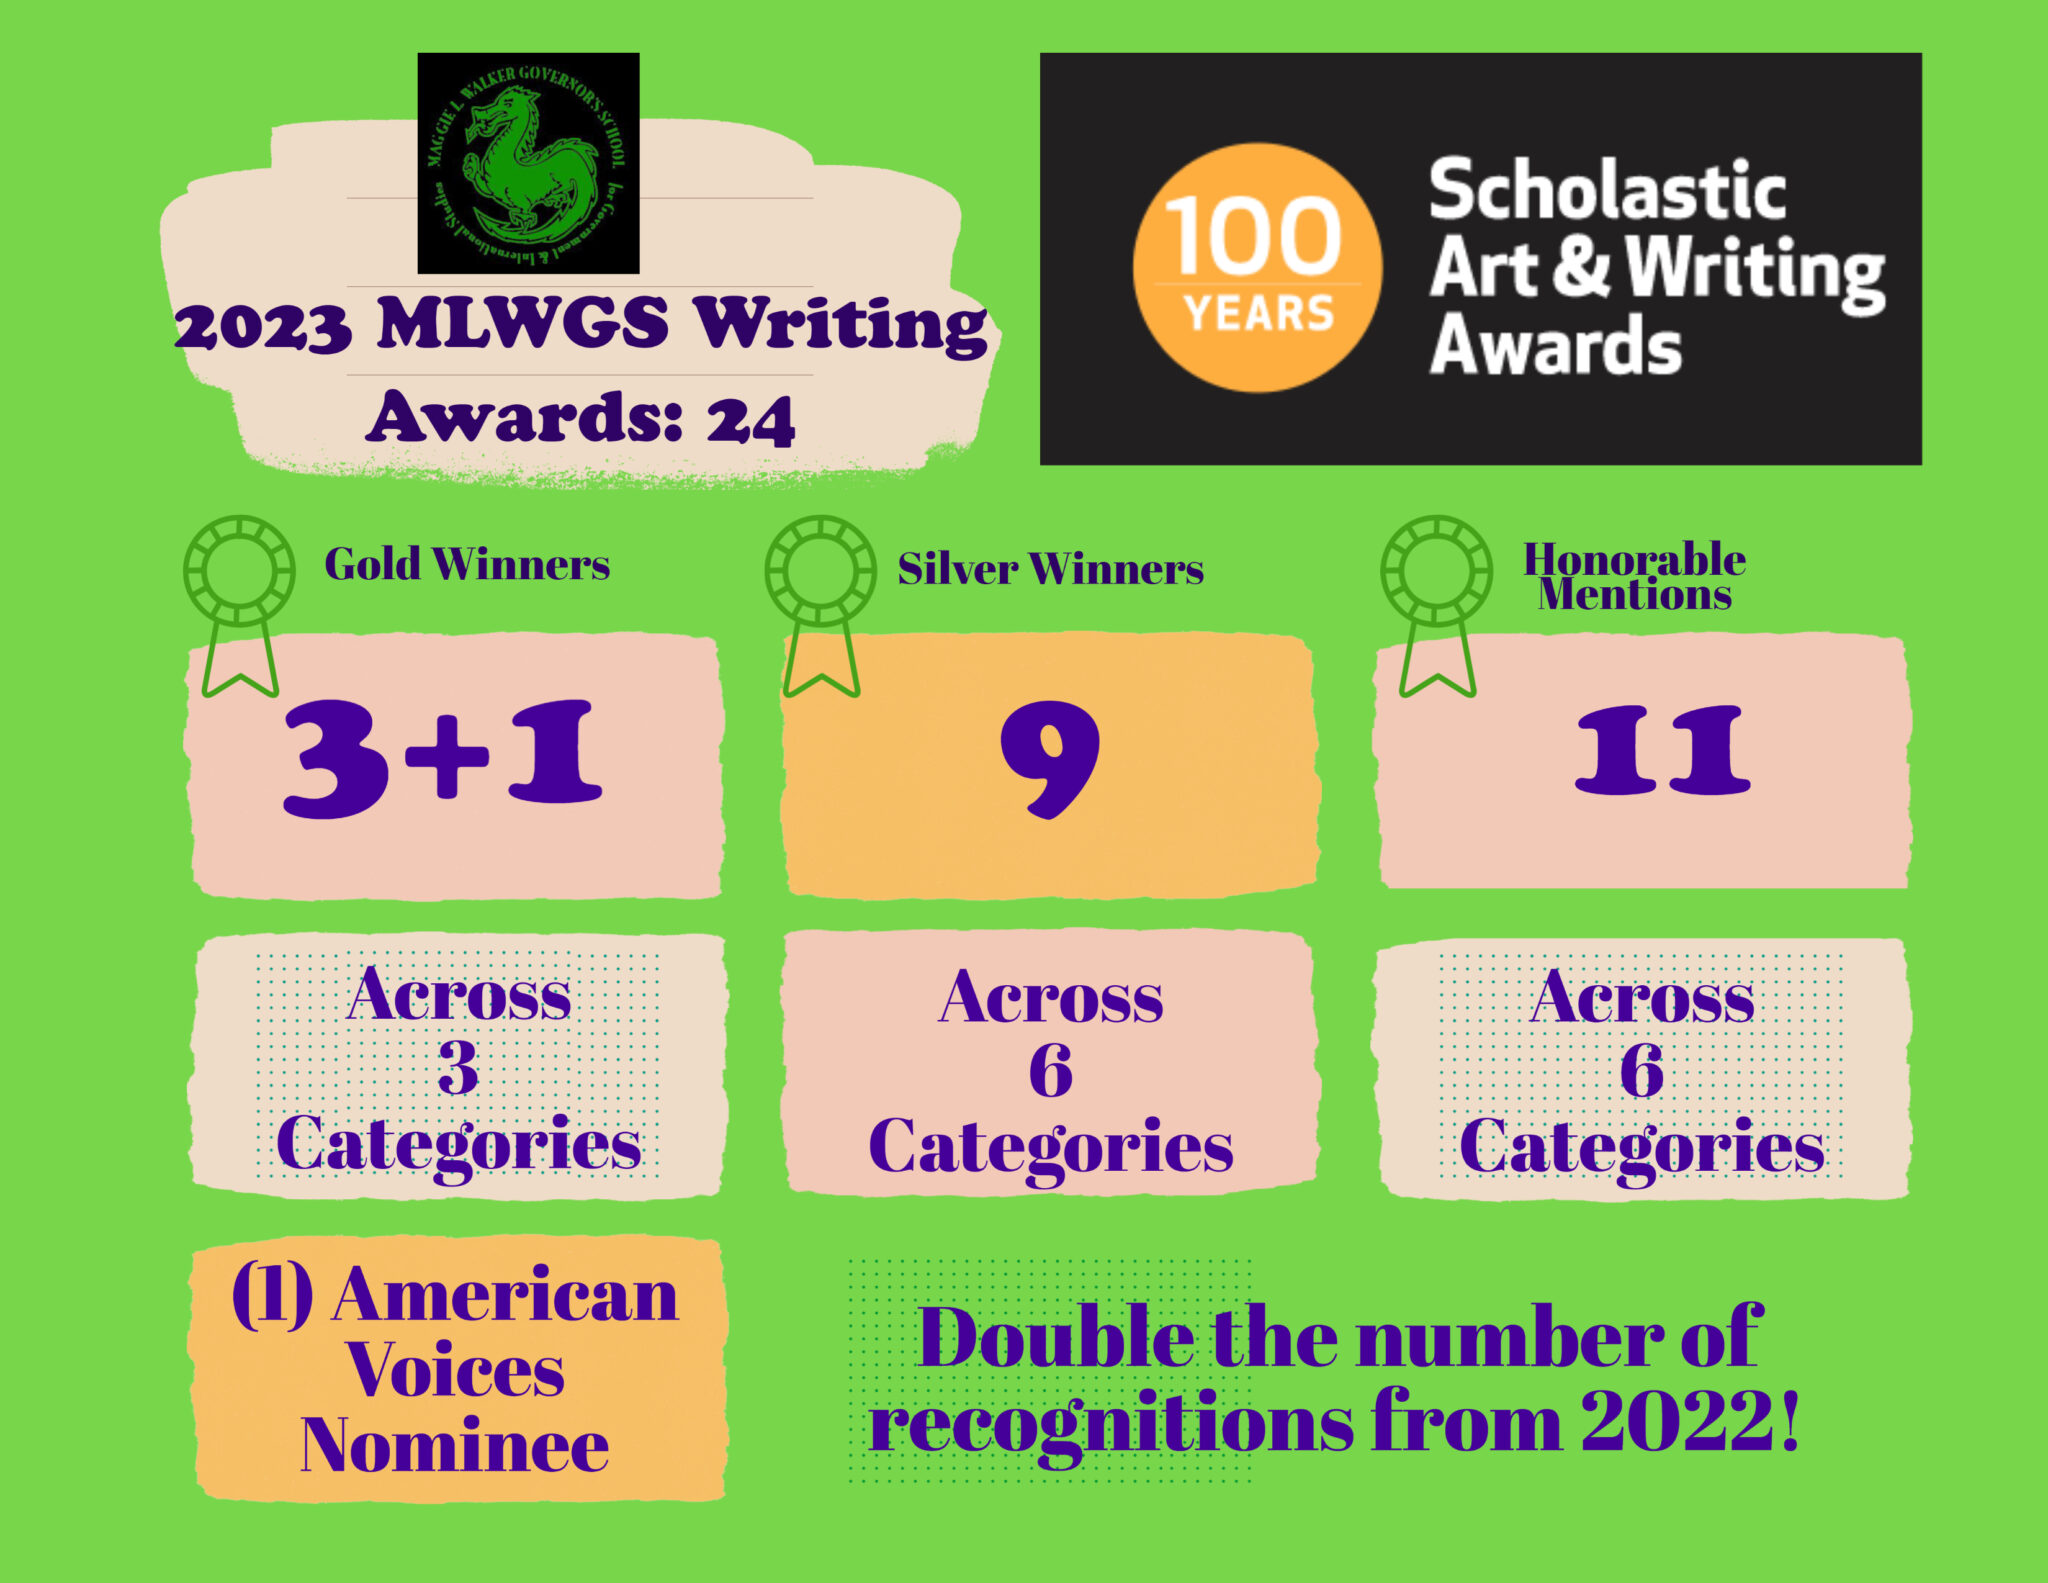 MLWGS earns 24 honors with the 2023 Scholastic Writing Awards Maggie